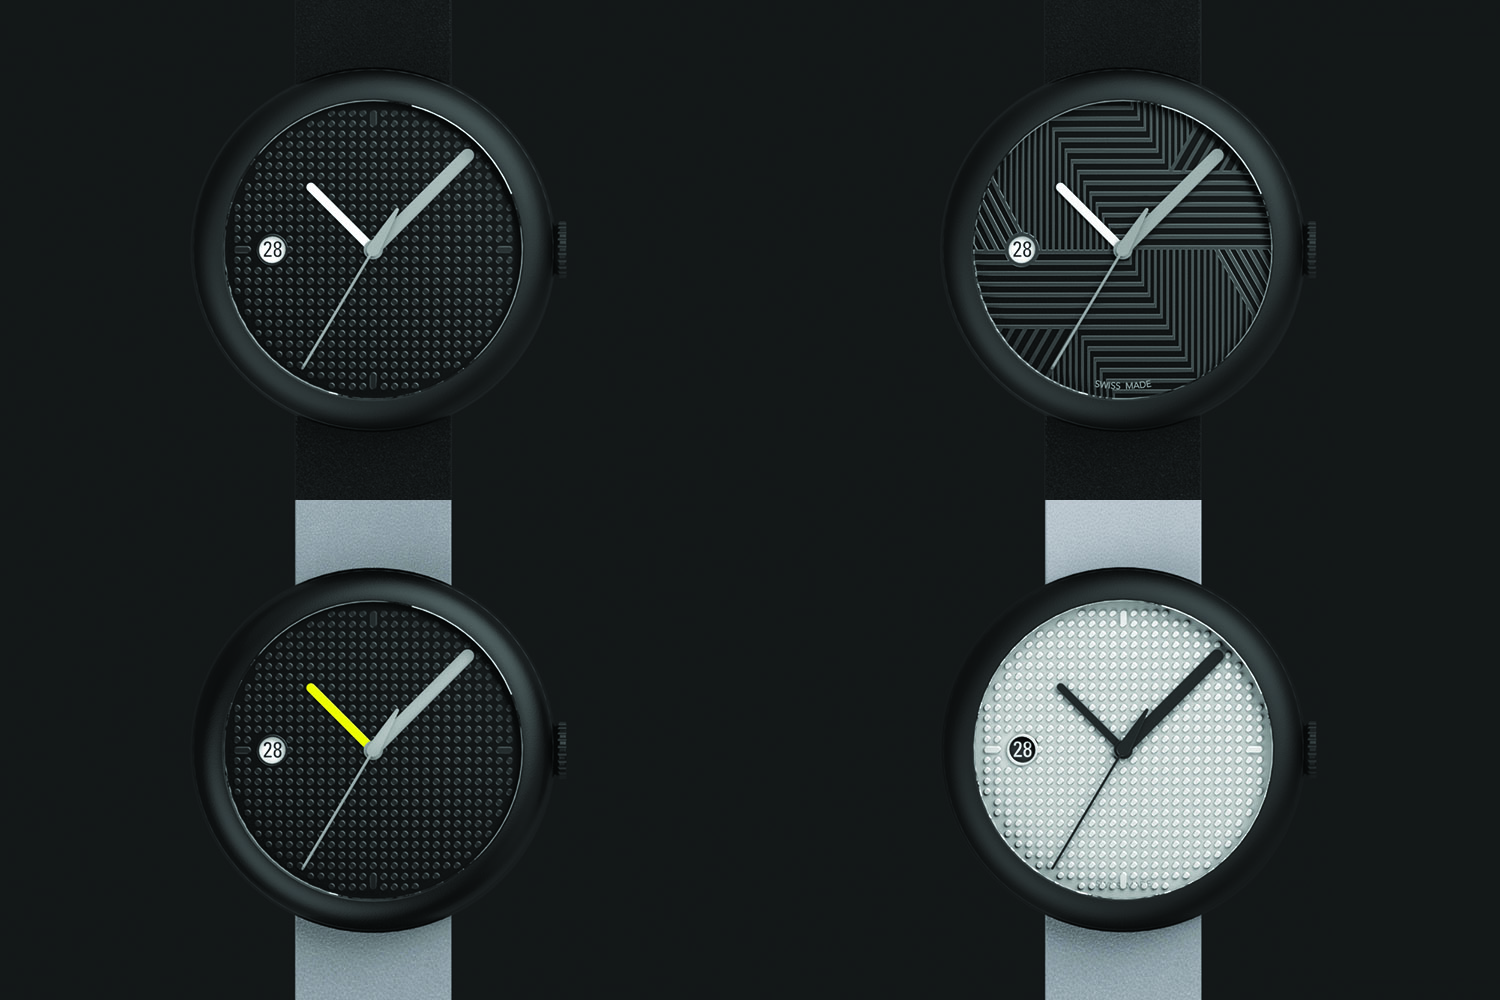 objest-automatic-customizable-watches-2